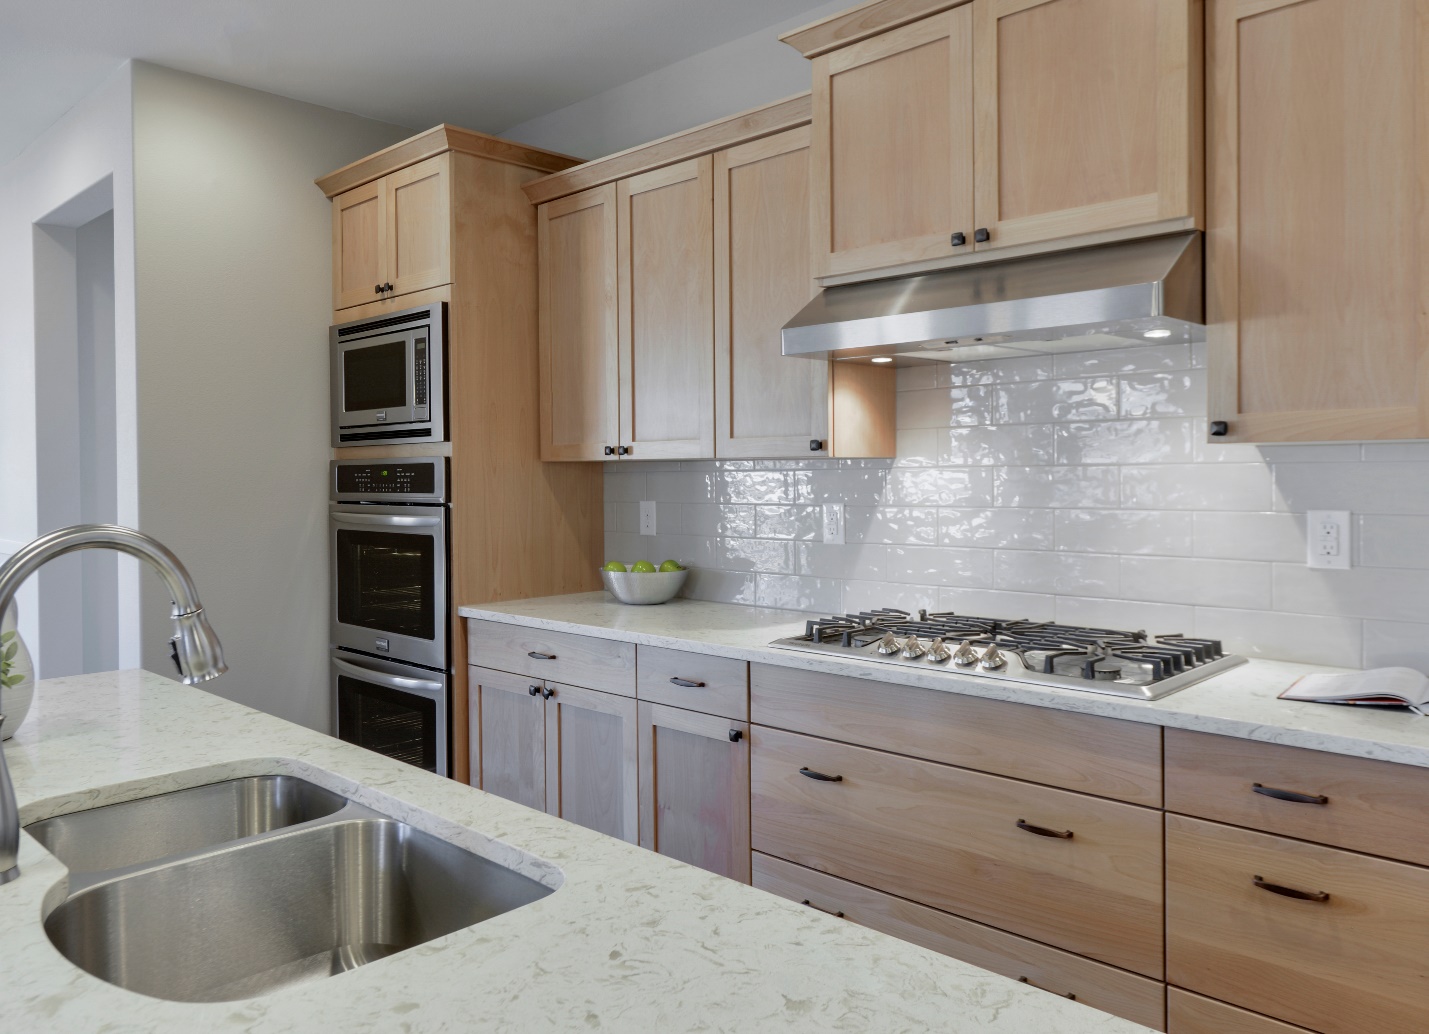 Remodel a Kitchen on a Budget Using Maple Kitchen Cabinets